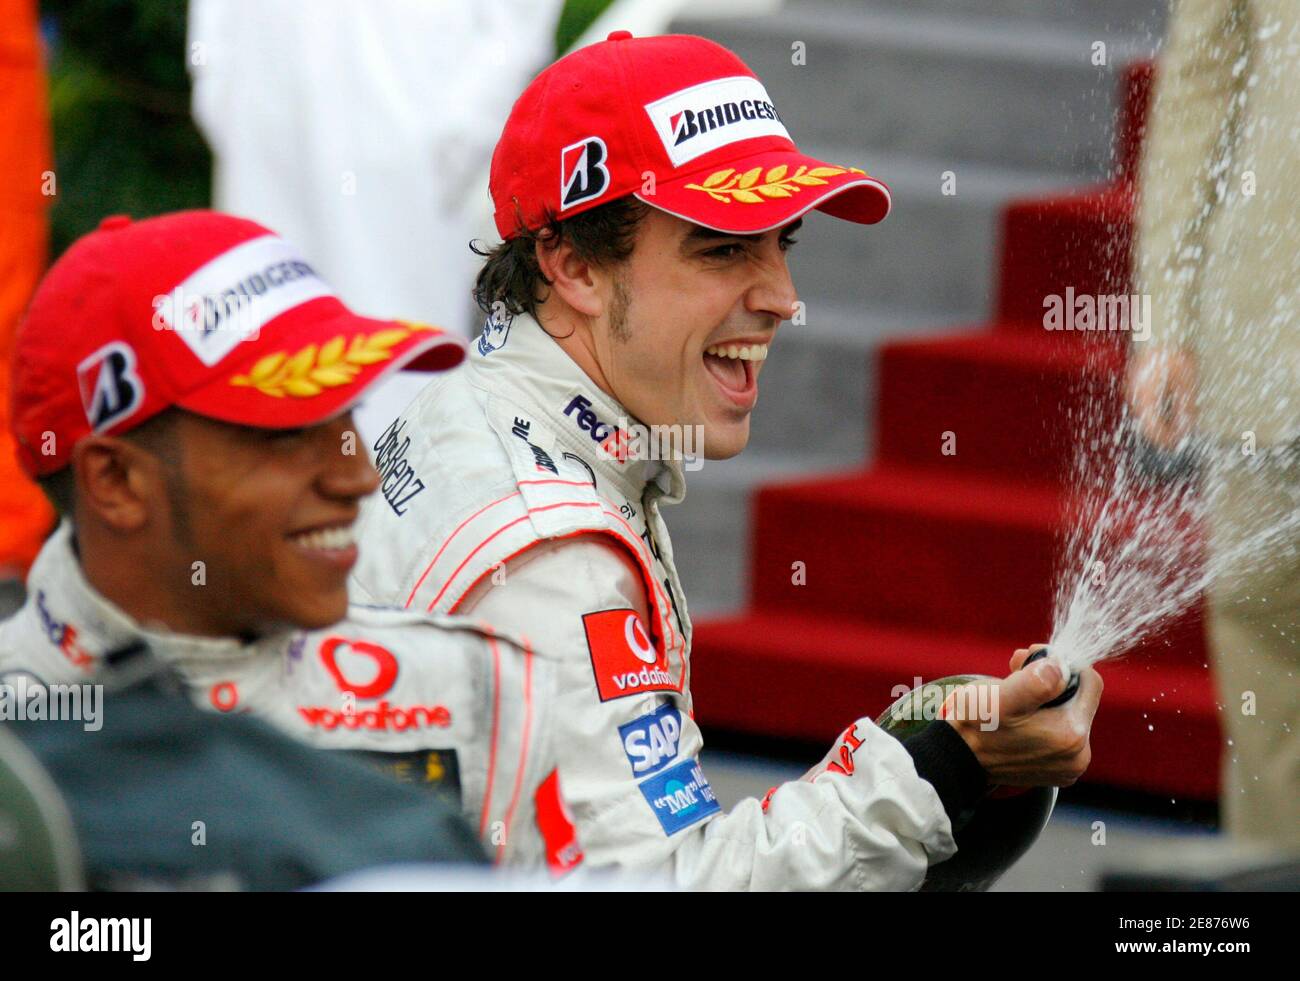 McLaren Formula One drivers Fernando Alonso (R) of Spain and Lewis Hamilton  (L) of Britain spray champagne after placing first and second in the Monaco  F1 Grand Prix in Monte Carlo May